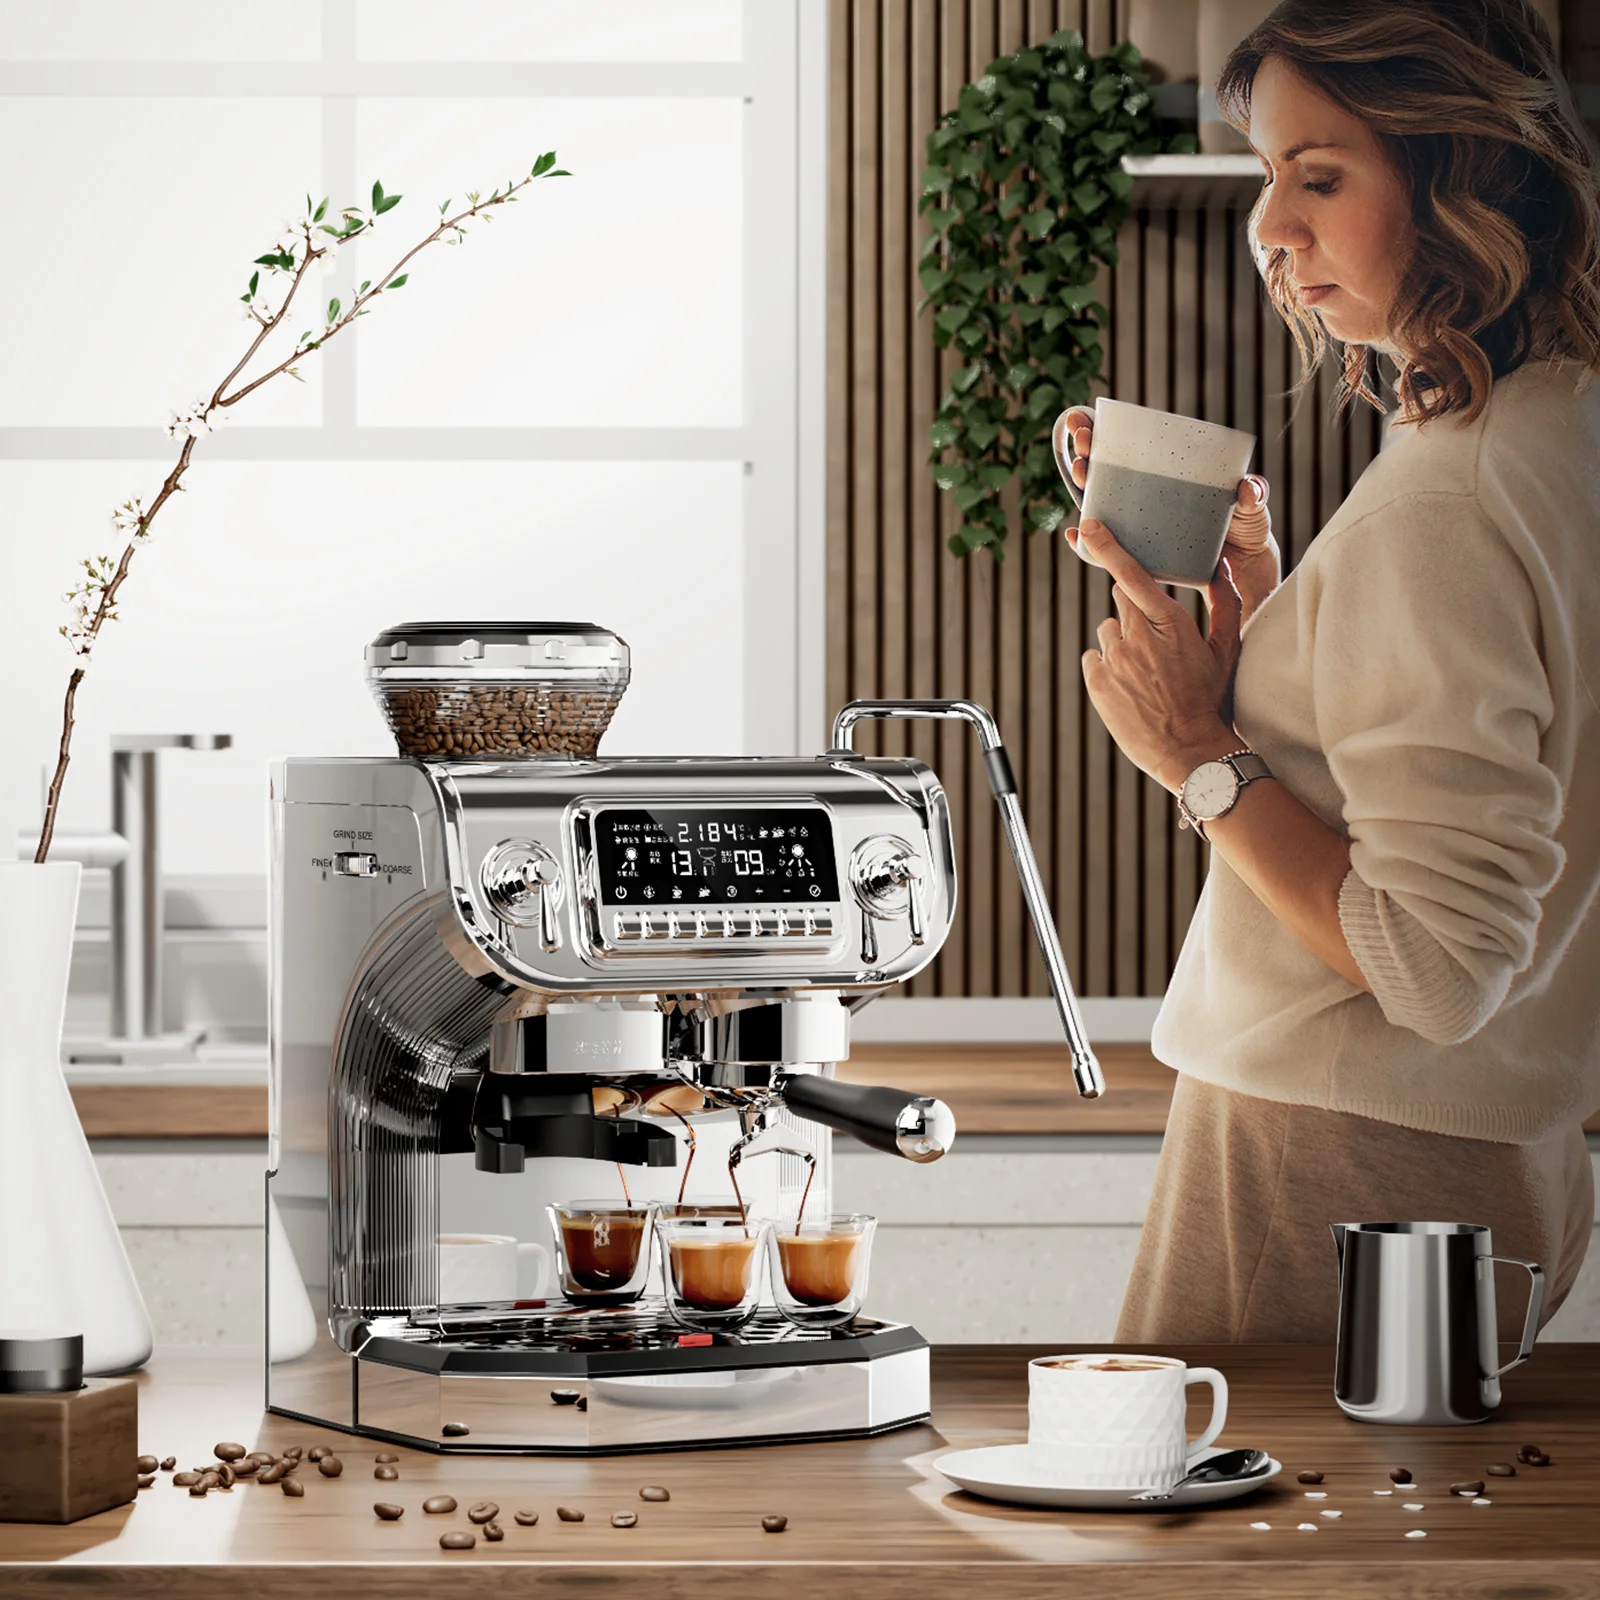 https://ae01.alicdn.com/kf/Sdb59153f7430484b81f80a357a6f78a6j/Mcilpoog-Espresso-Machine-with-Milk-Frother-Semi-Automatic-Coffee-Machine-with-Grinder-Easy-To-Use-Espresso.jpg